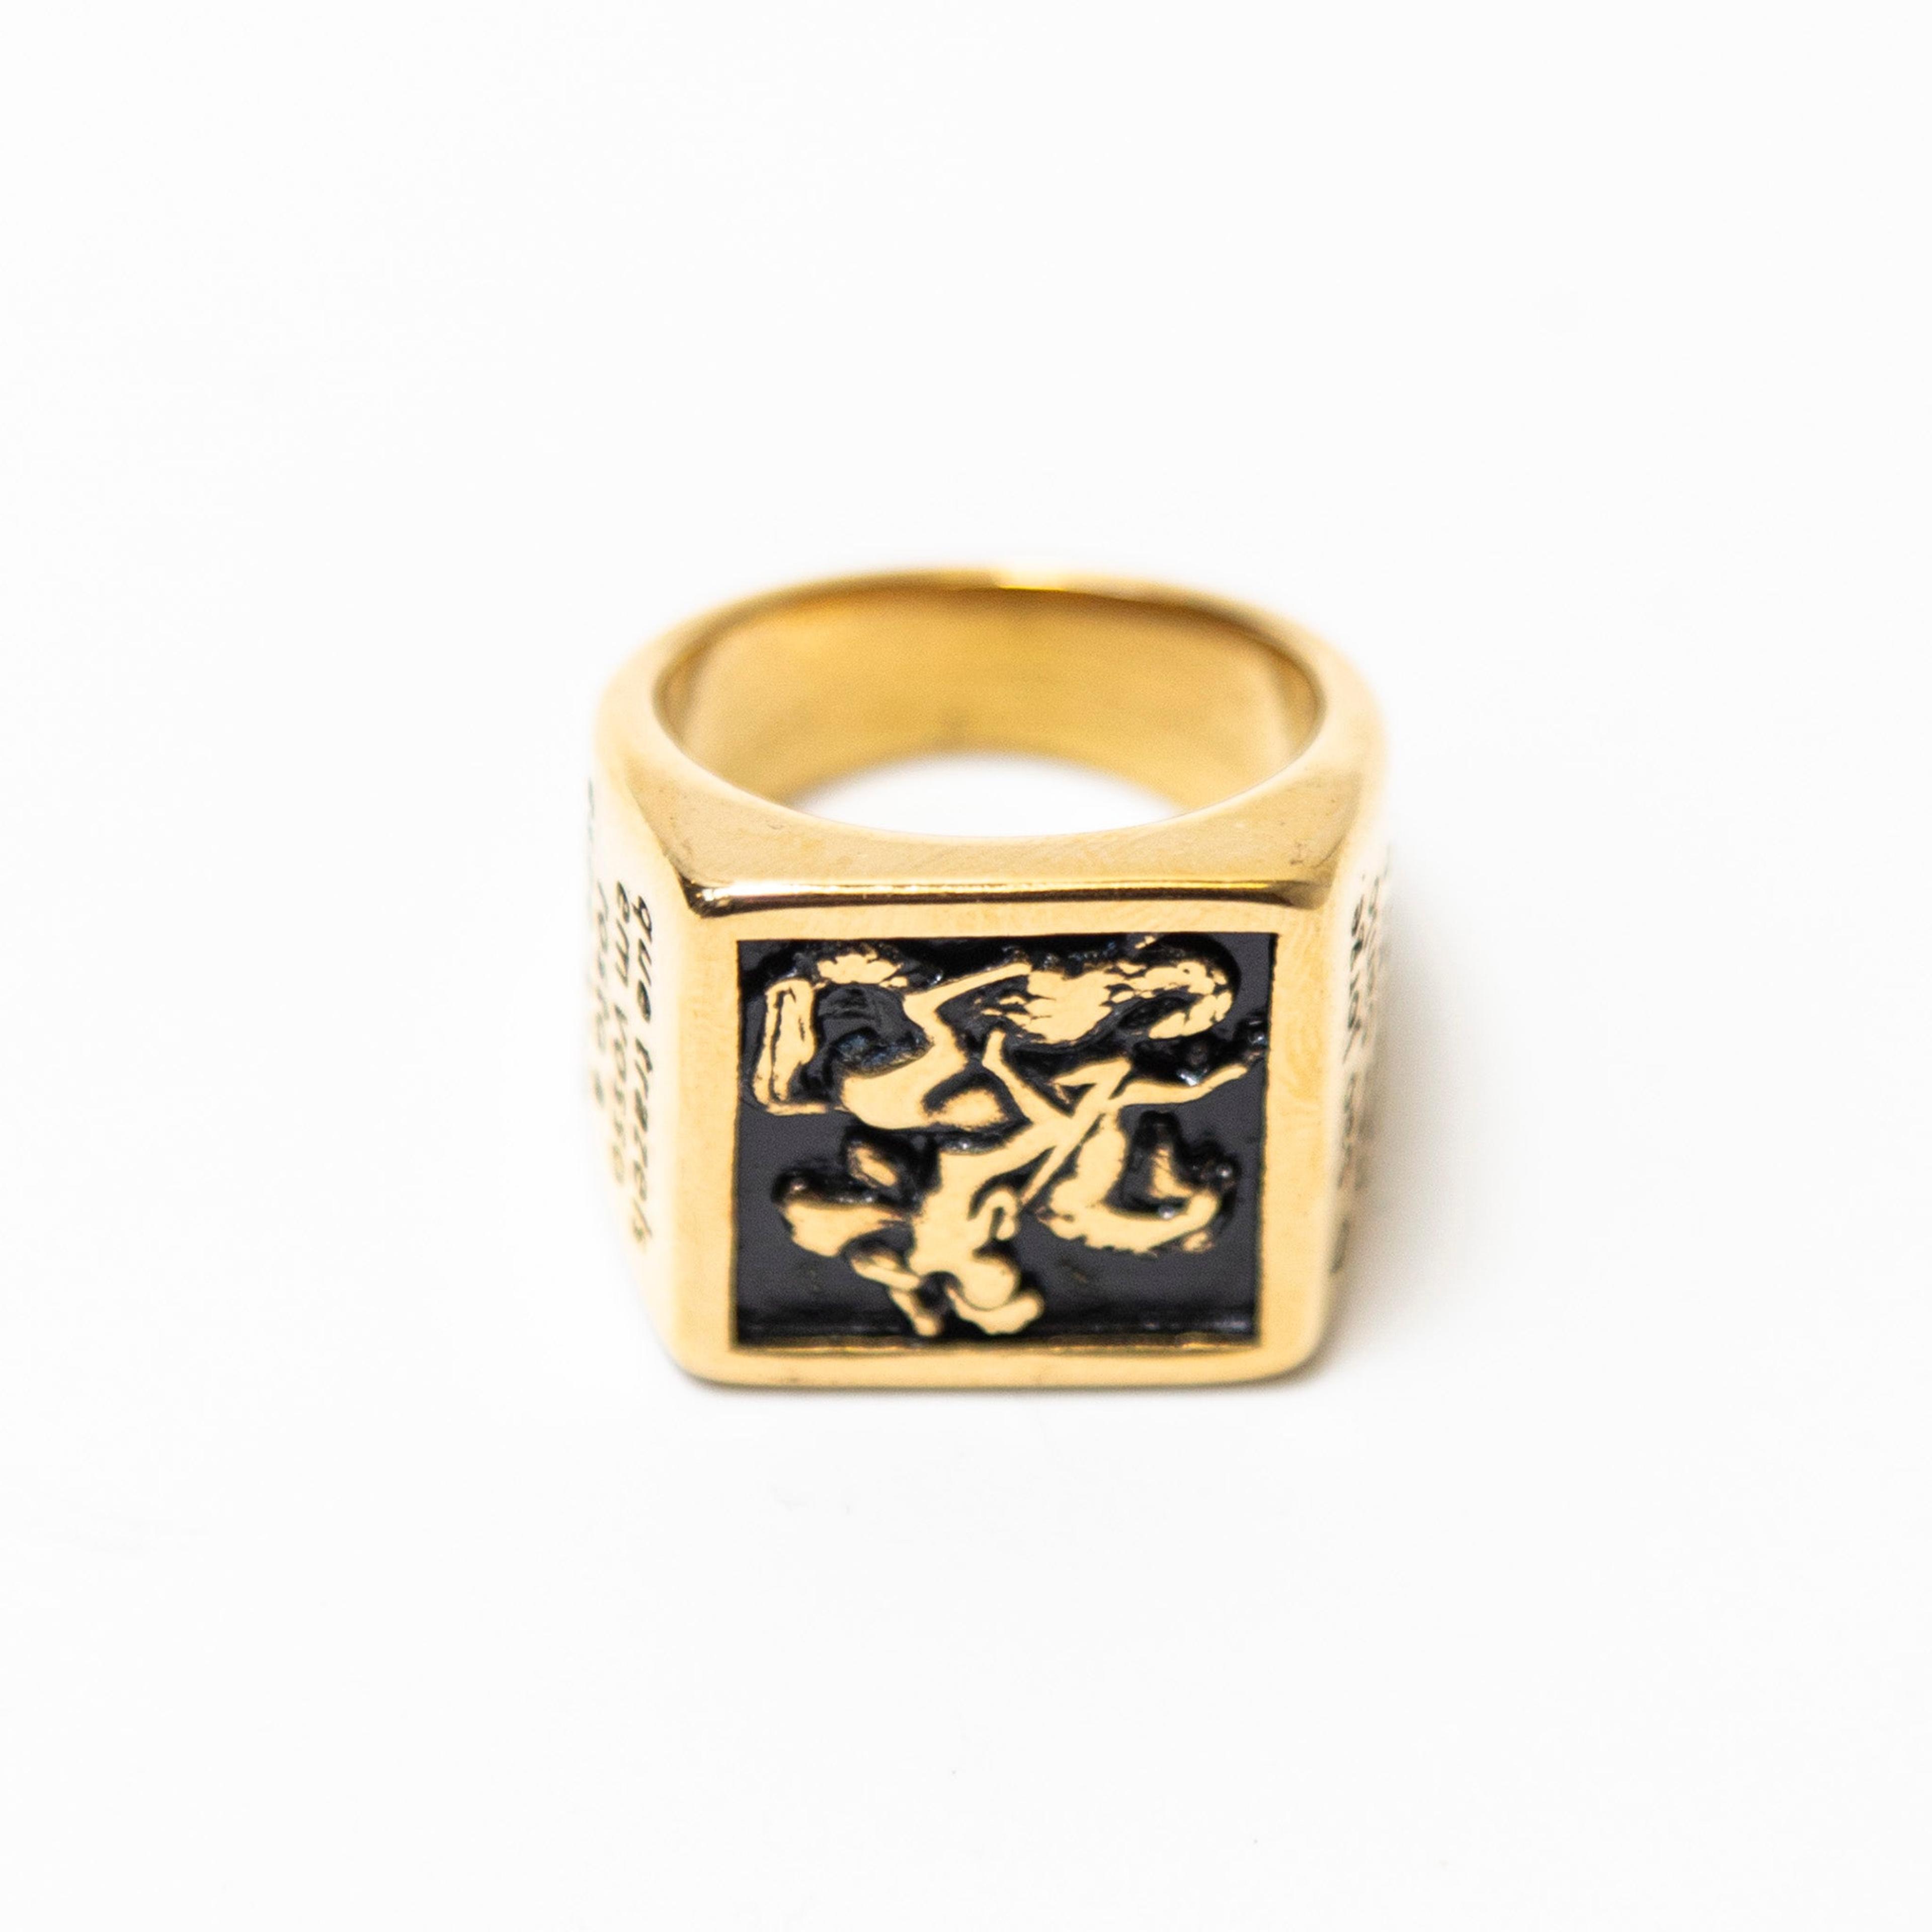 Alternate View 3 of ST George Signet Ring